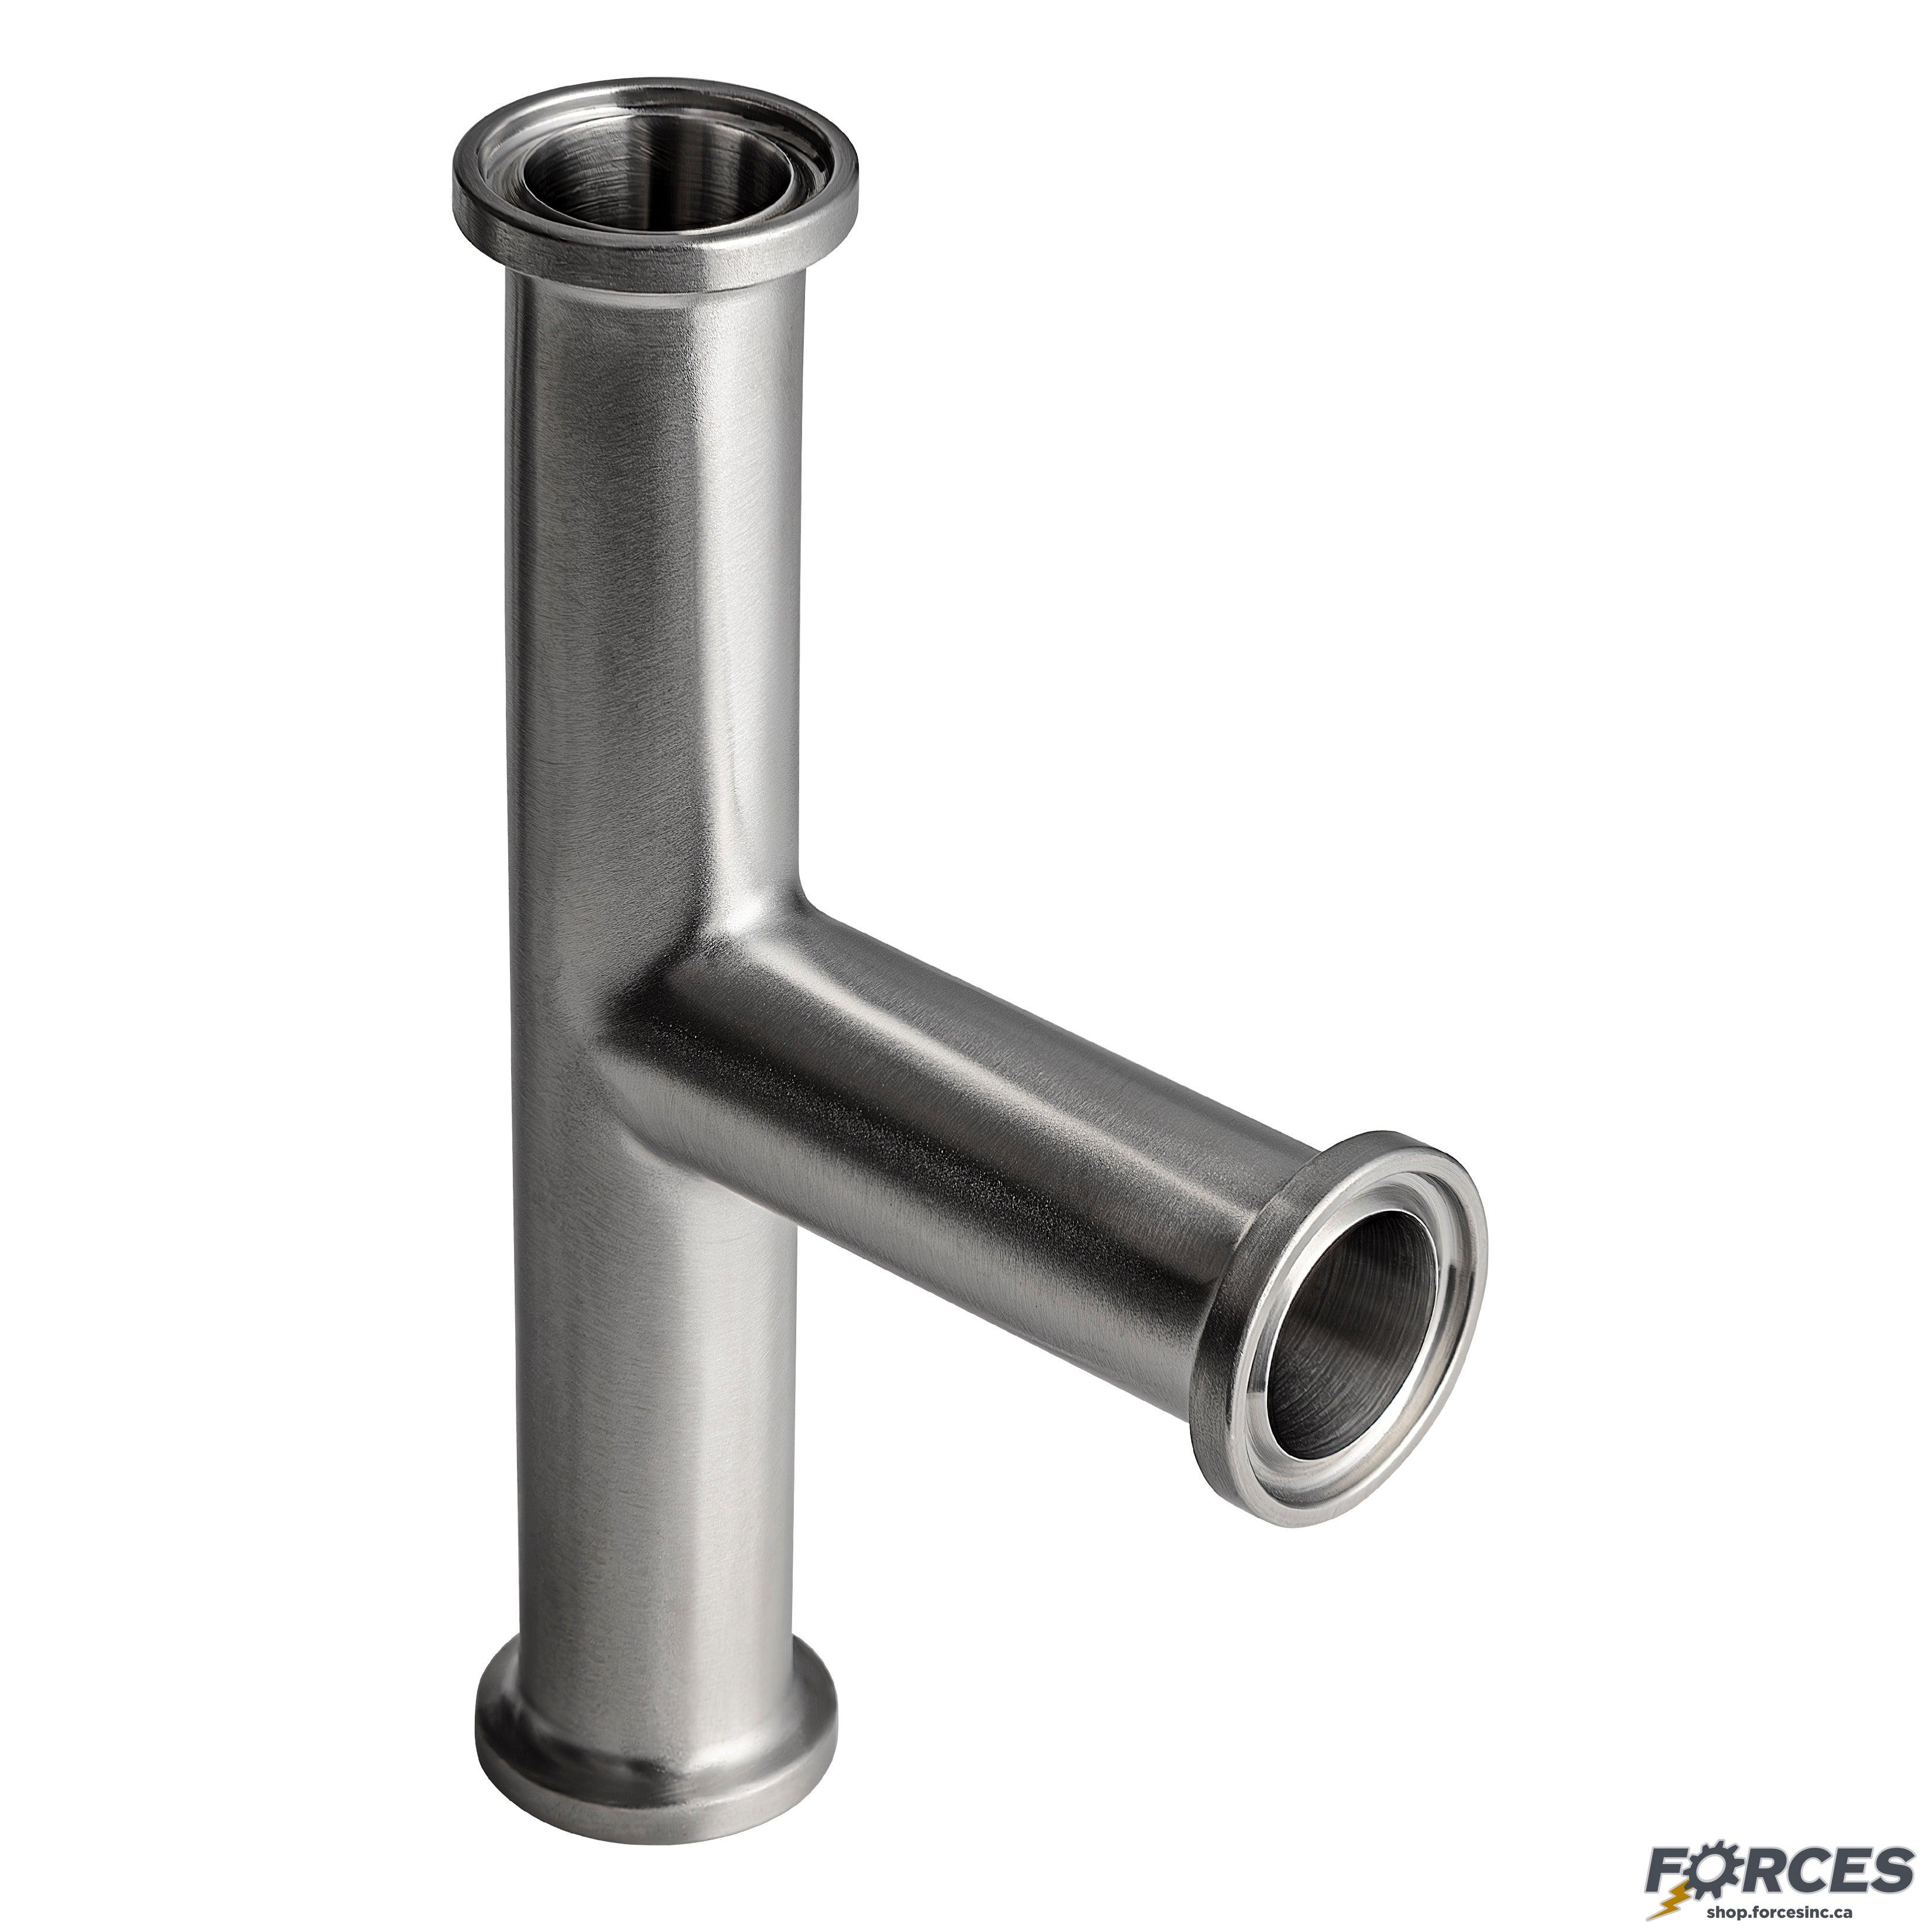 1-1/2" Tri-Clamp Tee - Stainless Steel 316 - Forces Inc